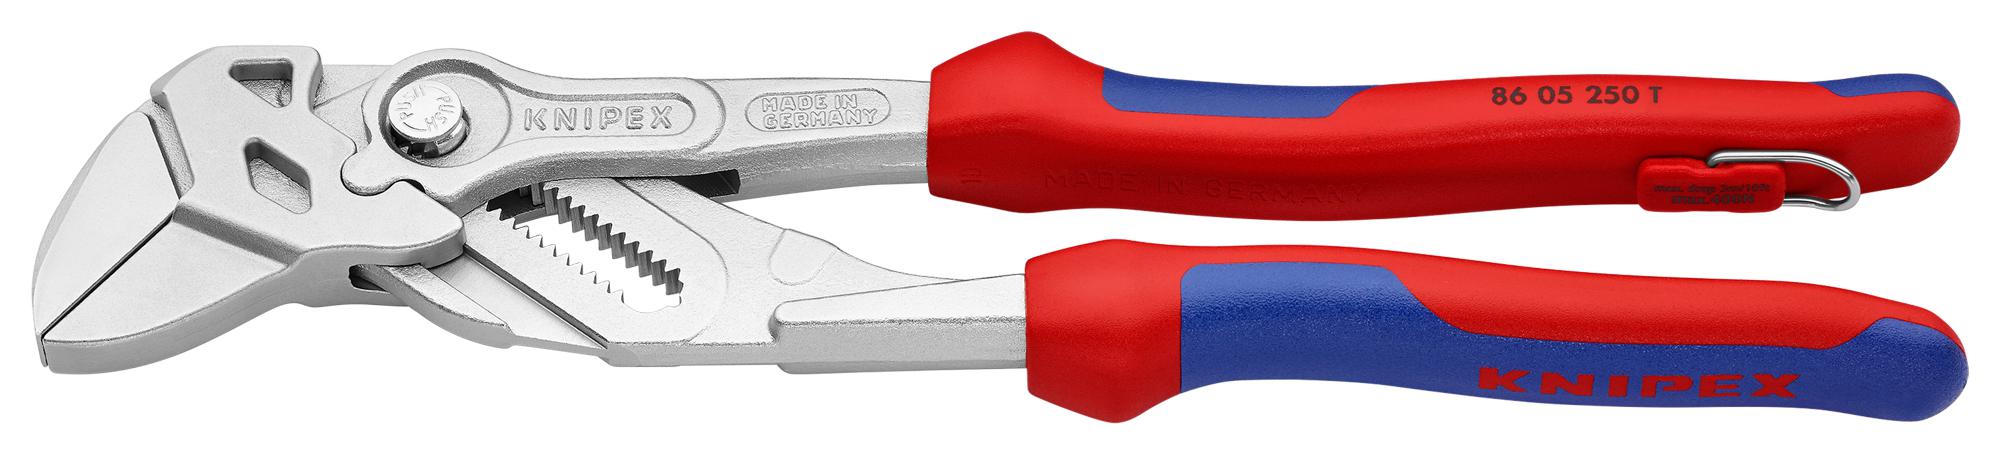 86 05 250 T PLIERS WRENCH, SLIP JOINT, 250MM KNIPEX